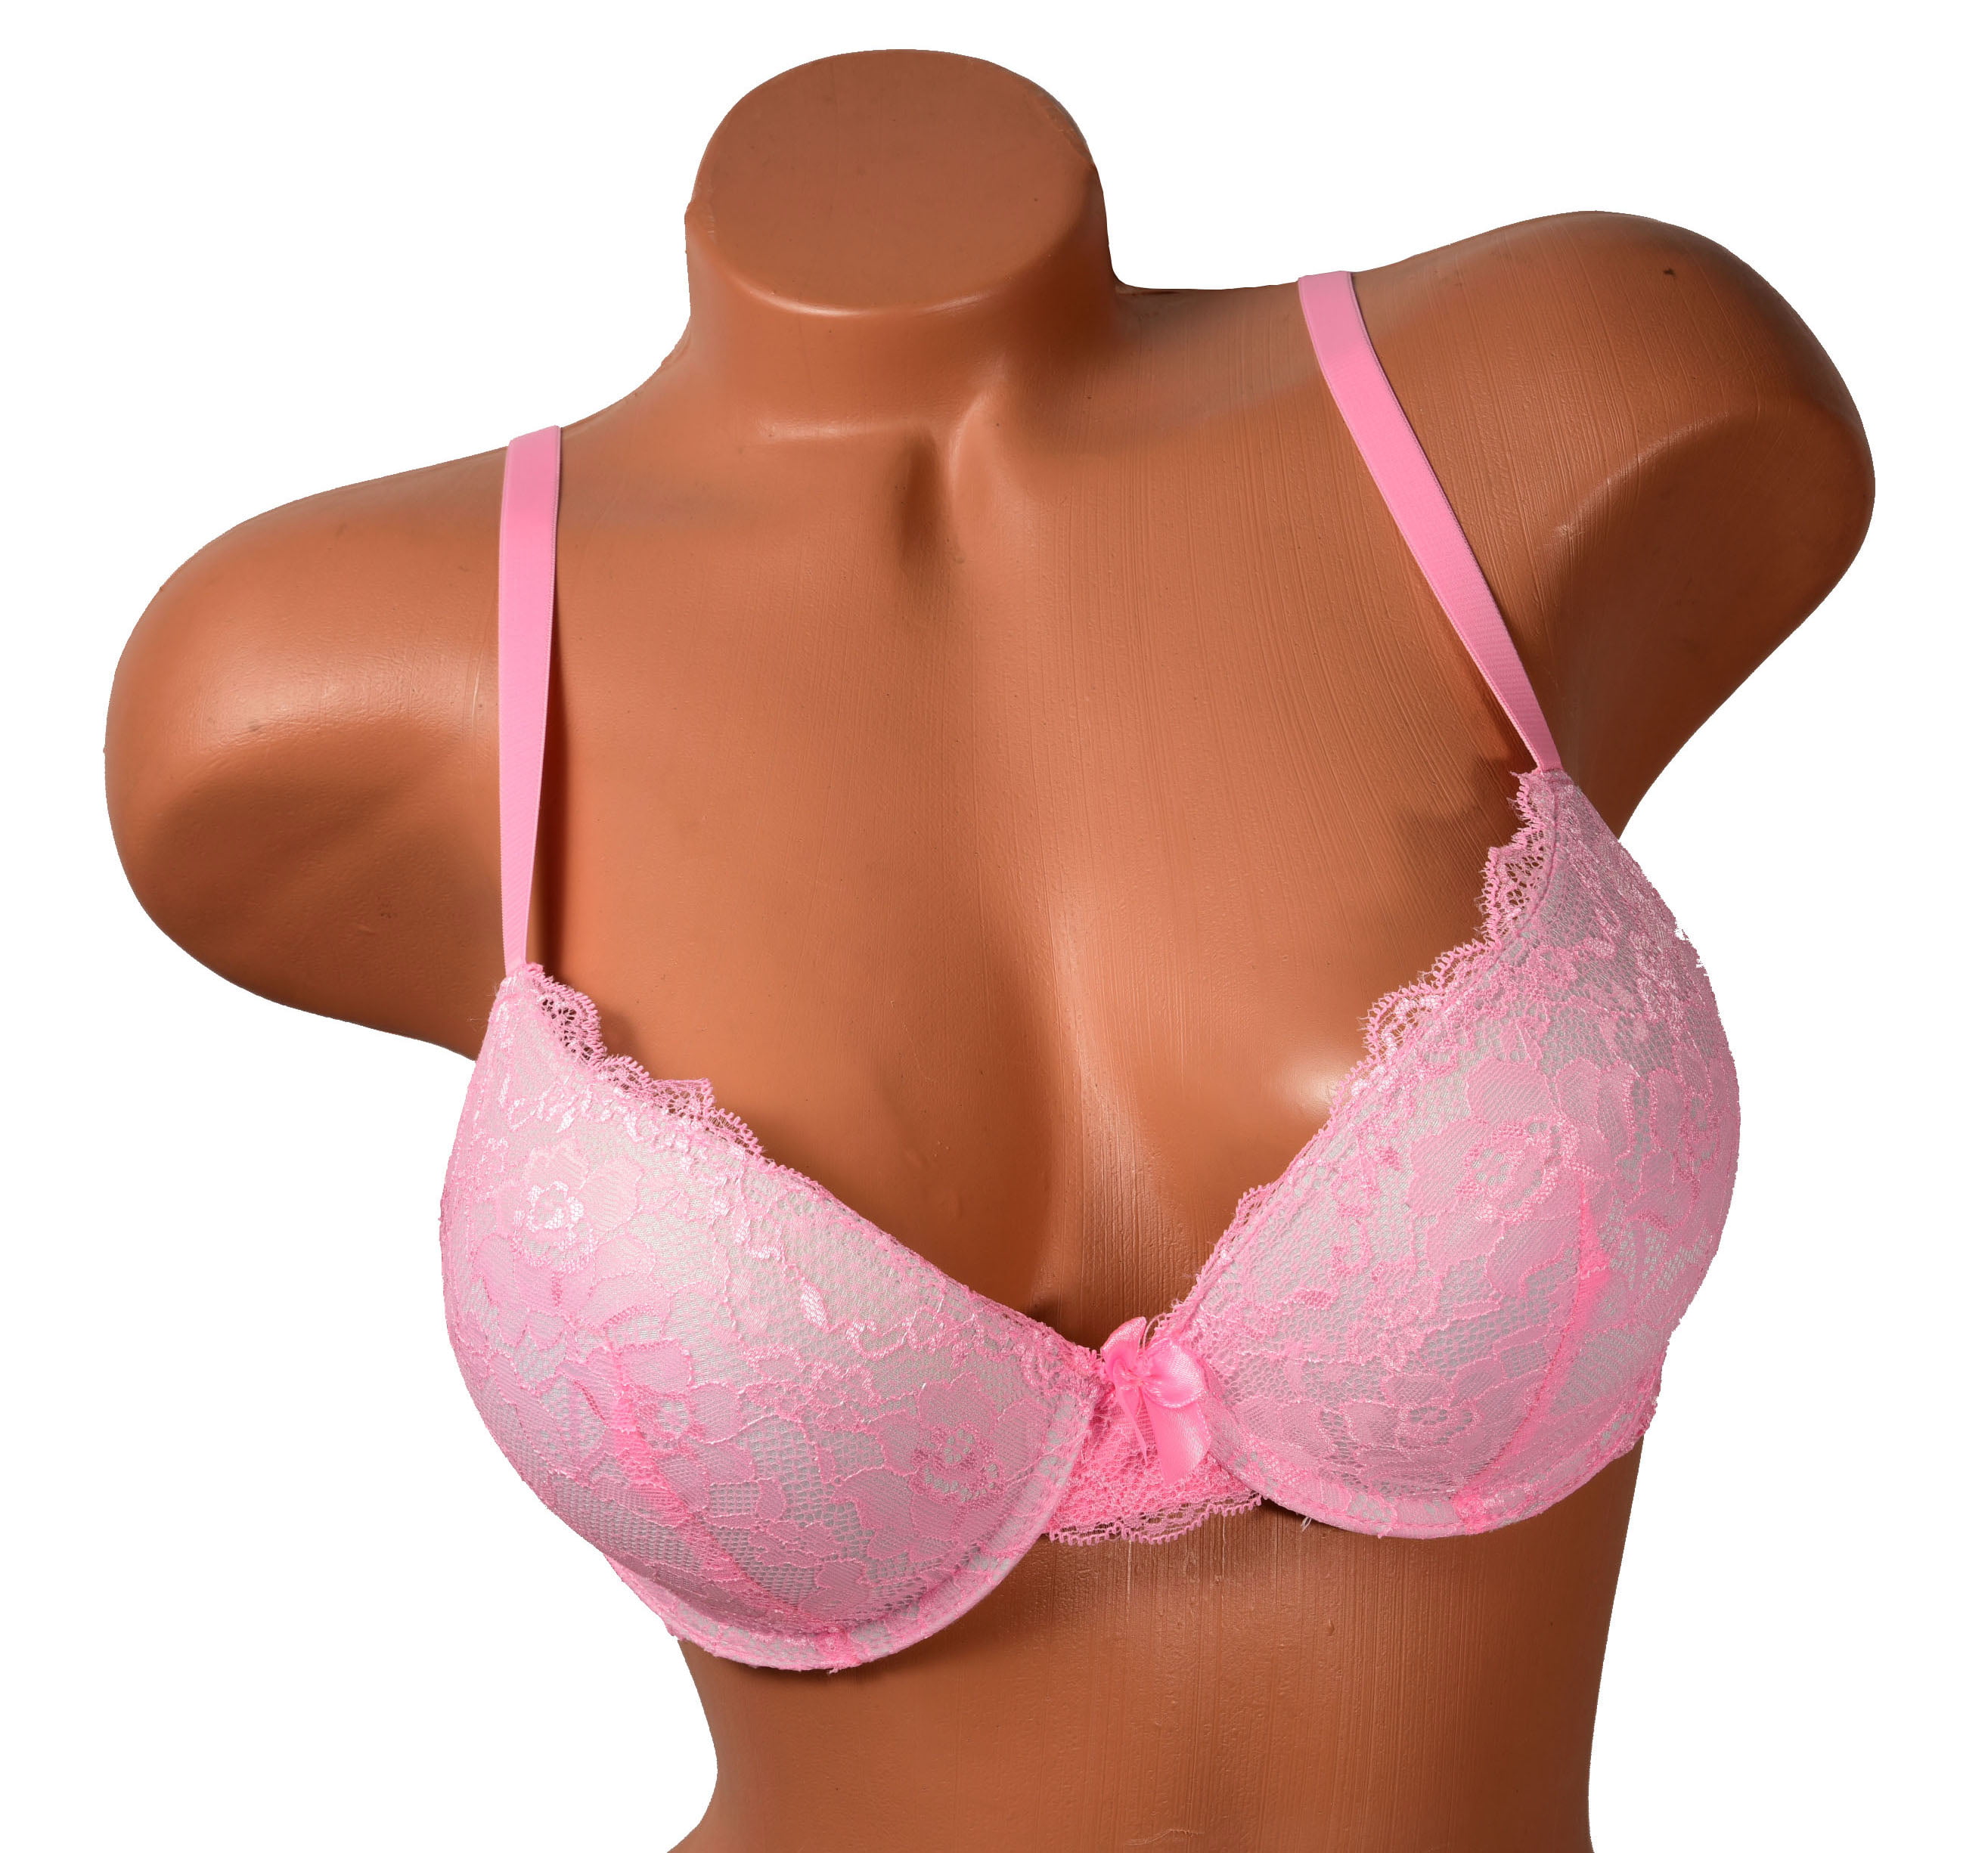 Women Bras 6 Pack of Double Pushup Lace Bra B cup C cup Size 34B (9904)